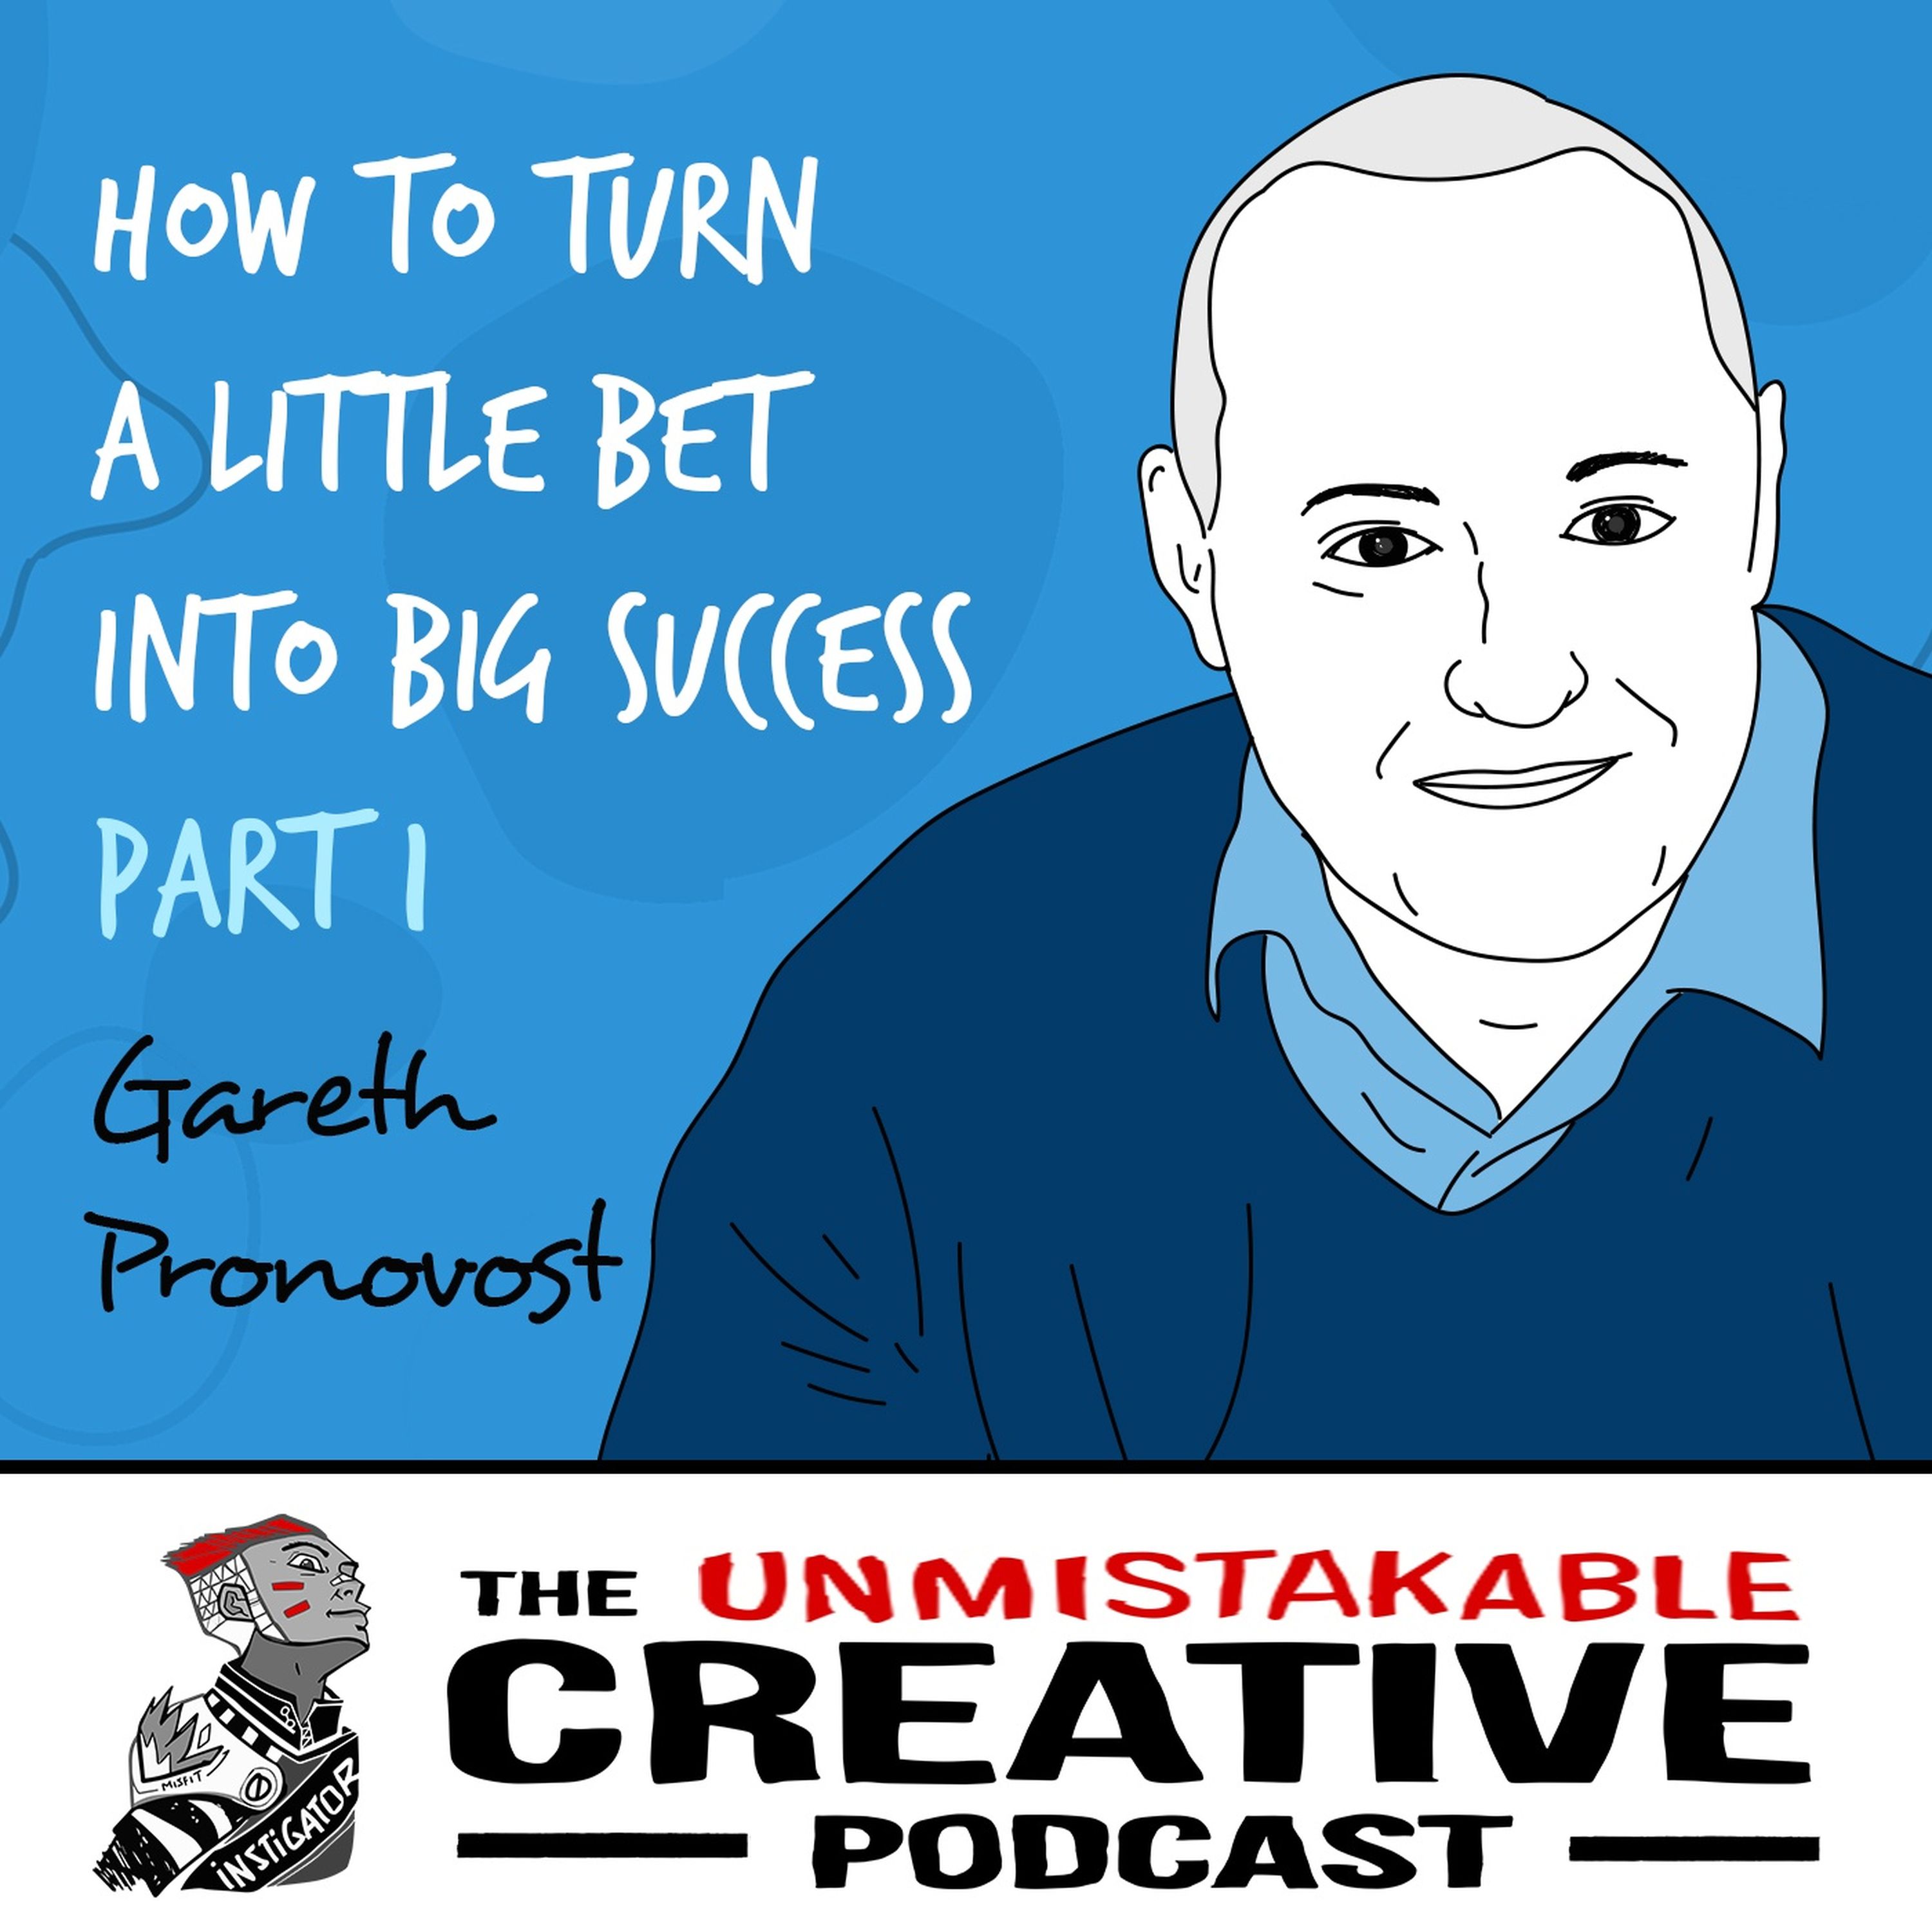 Gareth Pronovost | How to Turn a Little Bet into Big Success - Part 1